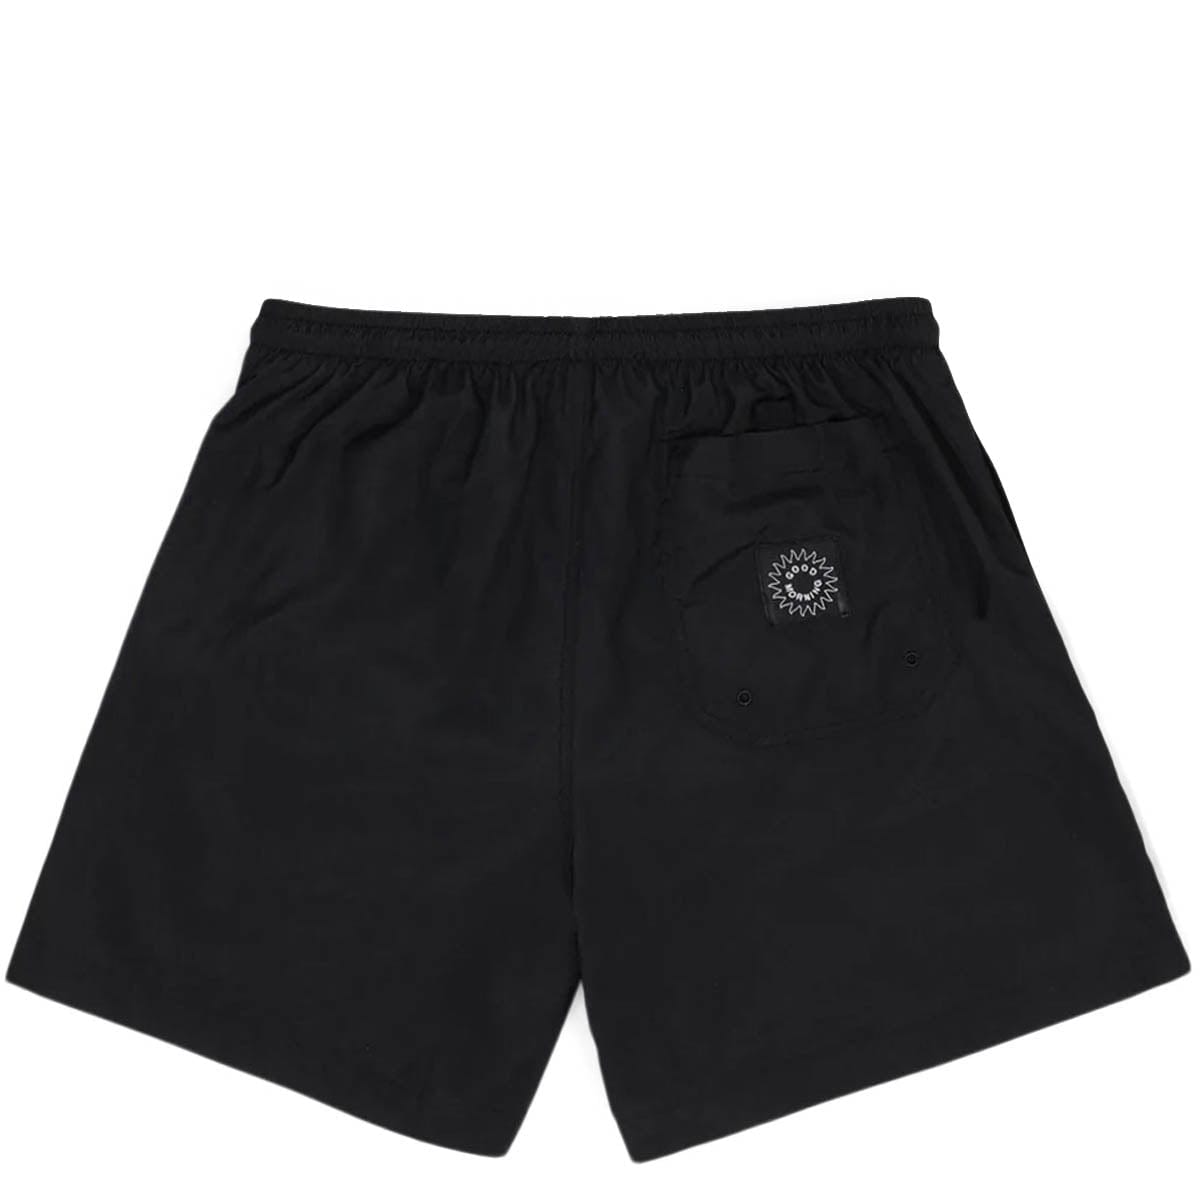 Good Morning Tapes Bottoms RECYCLED RIPSTOP SWIM SHORT